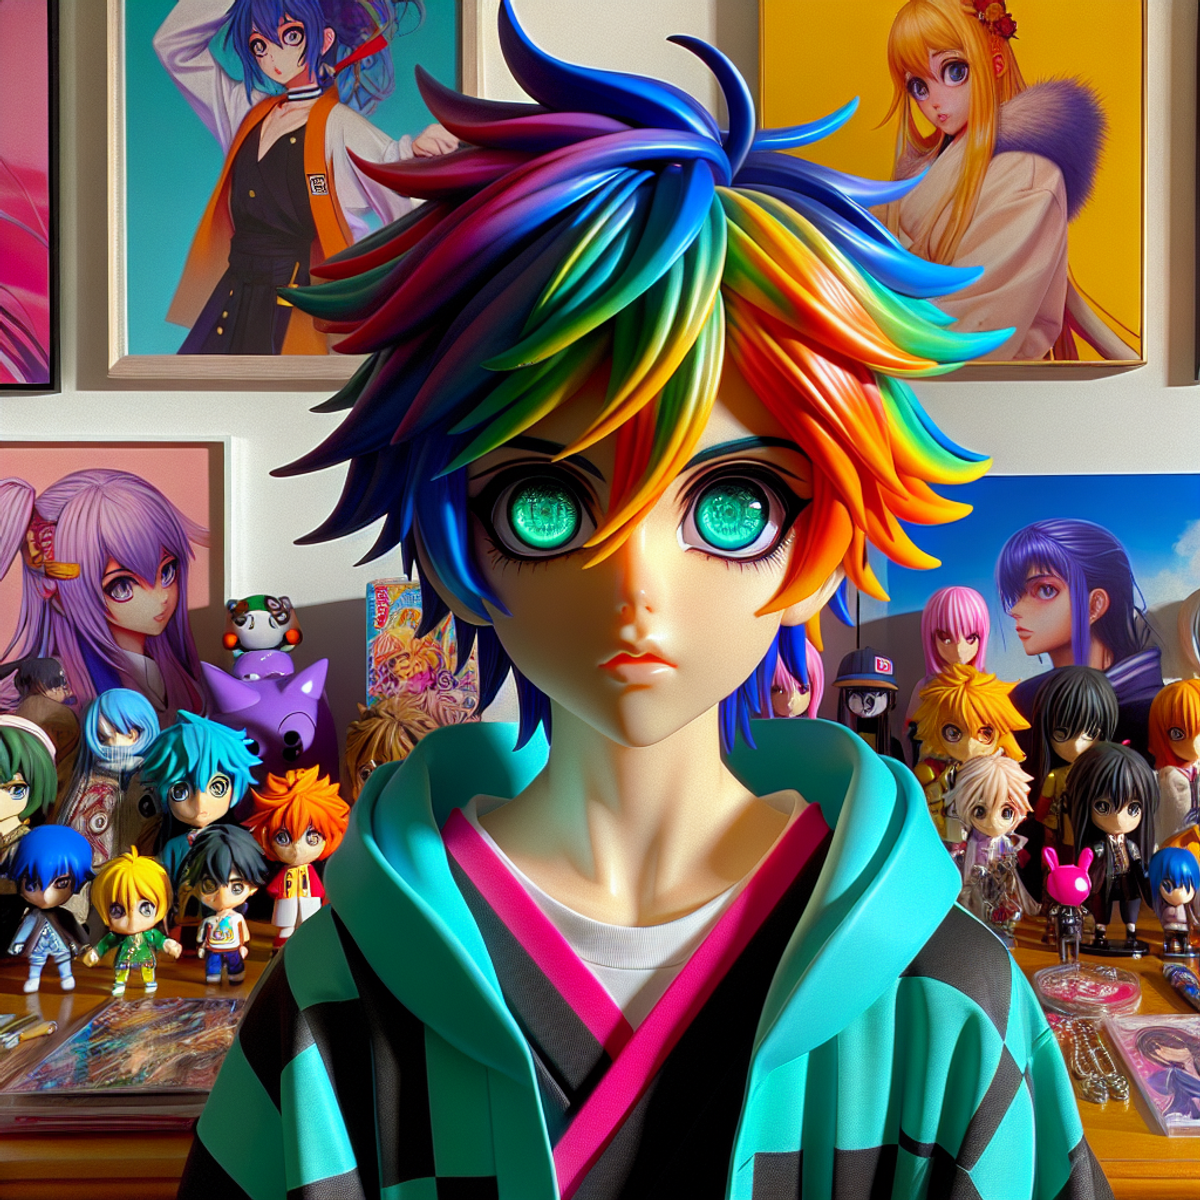 A colorful anime character surrounded by anime merchandise.